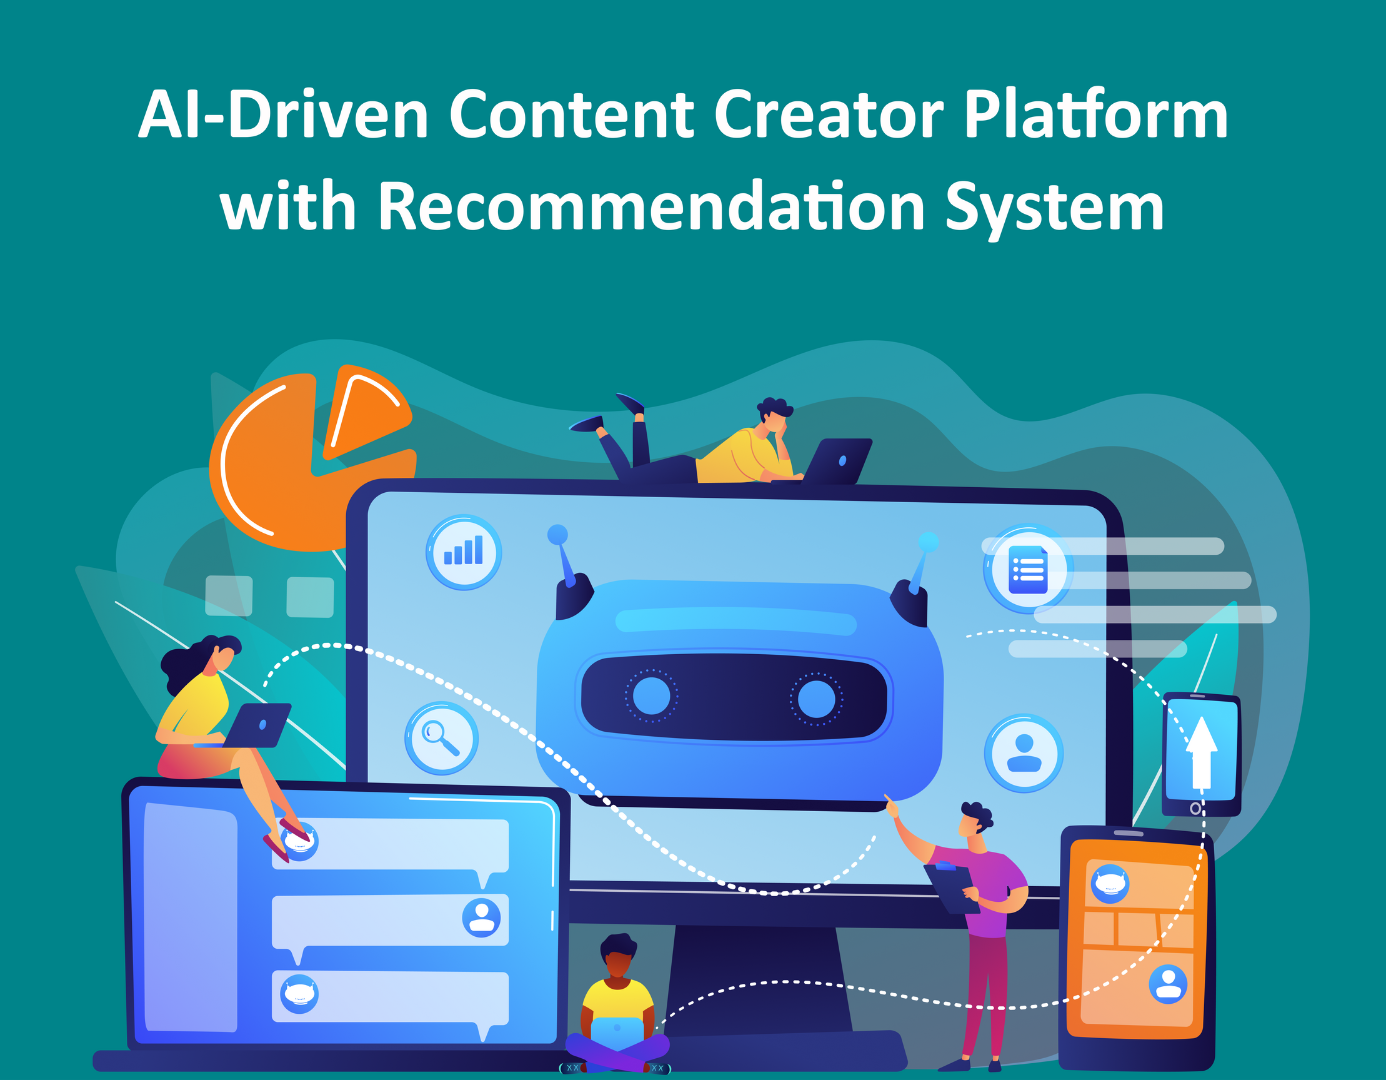 AI-Powered Content Creation Platform with Recommender System - Transforming Entertainment